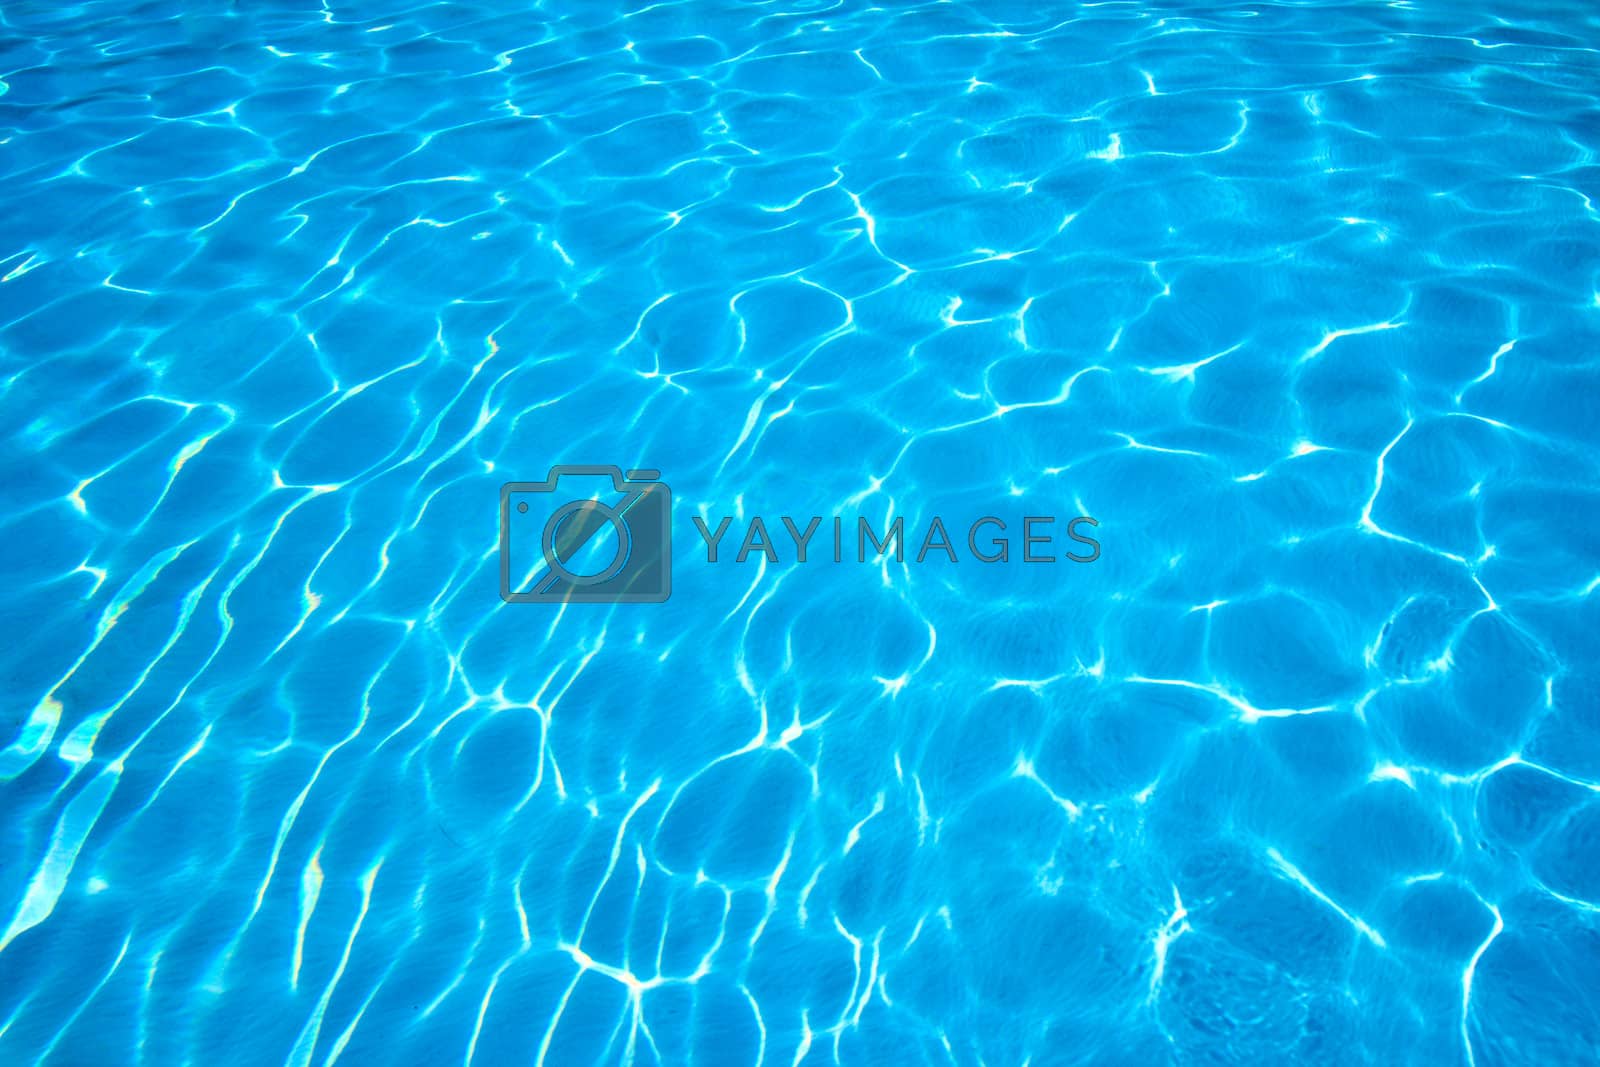 Royalty free image of Water ripple by dimol